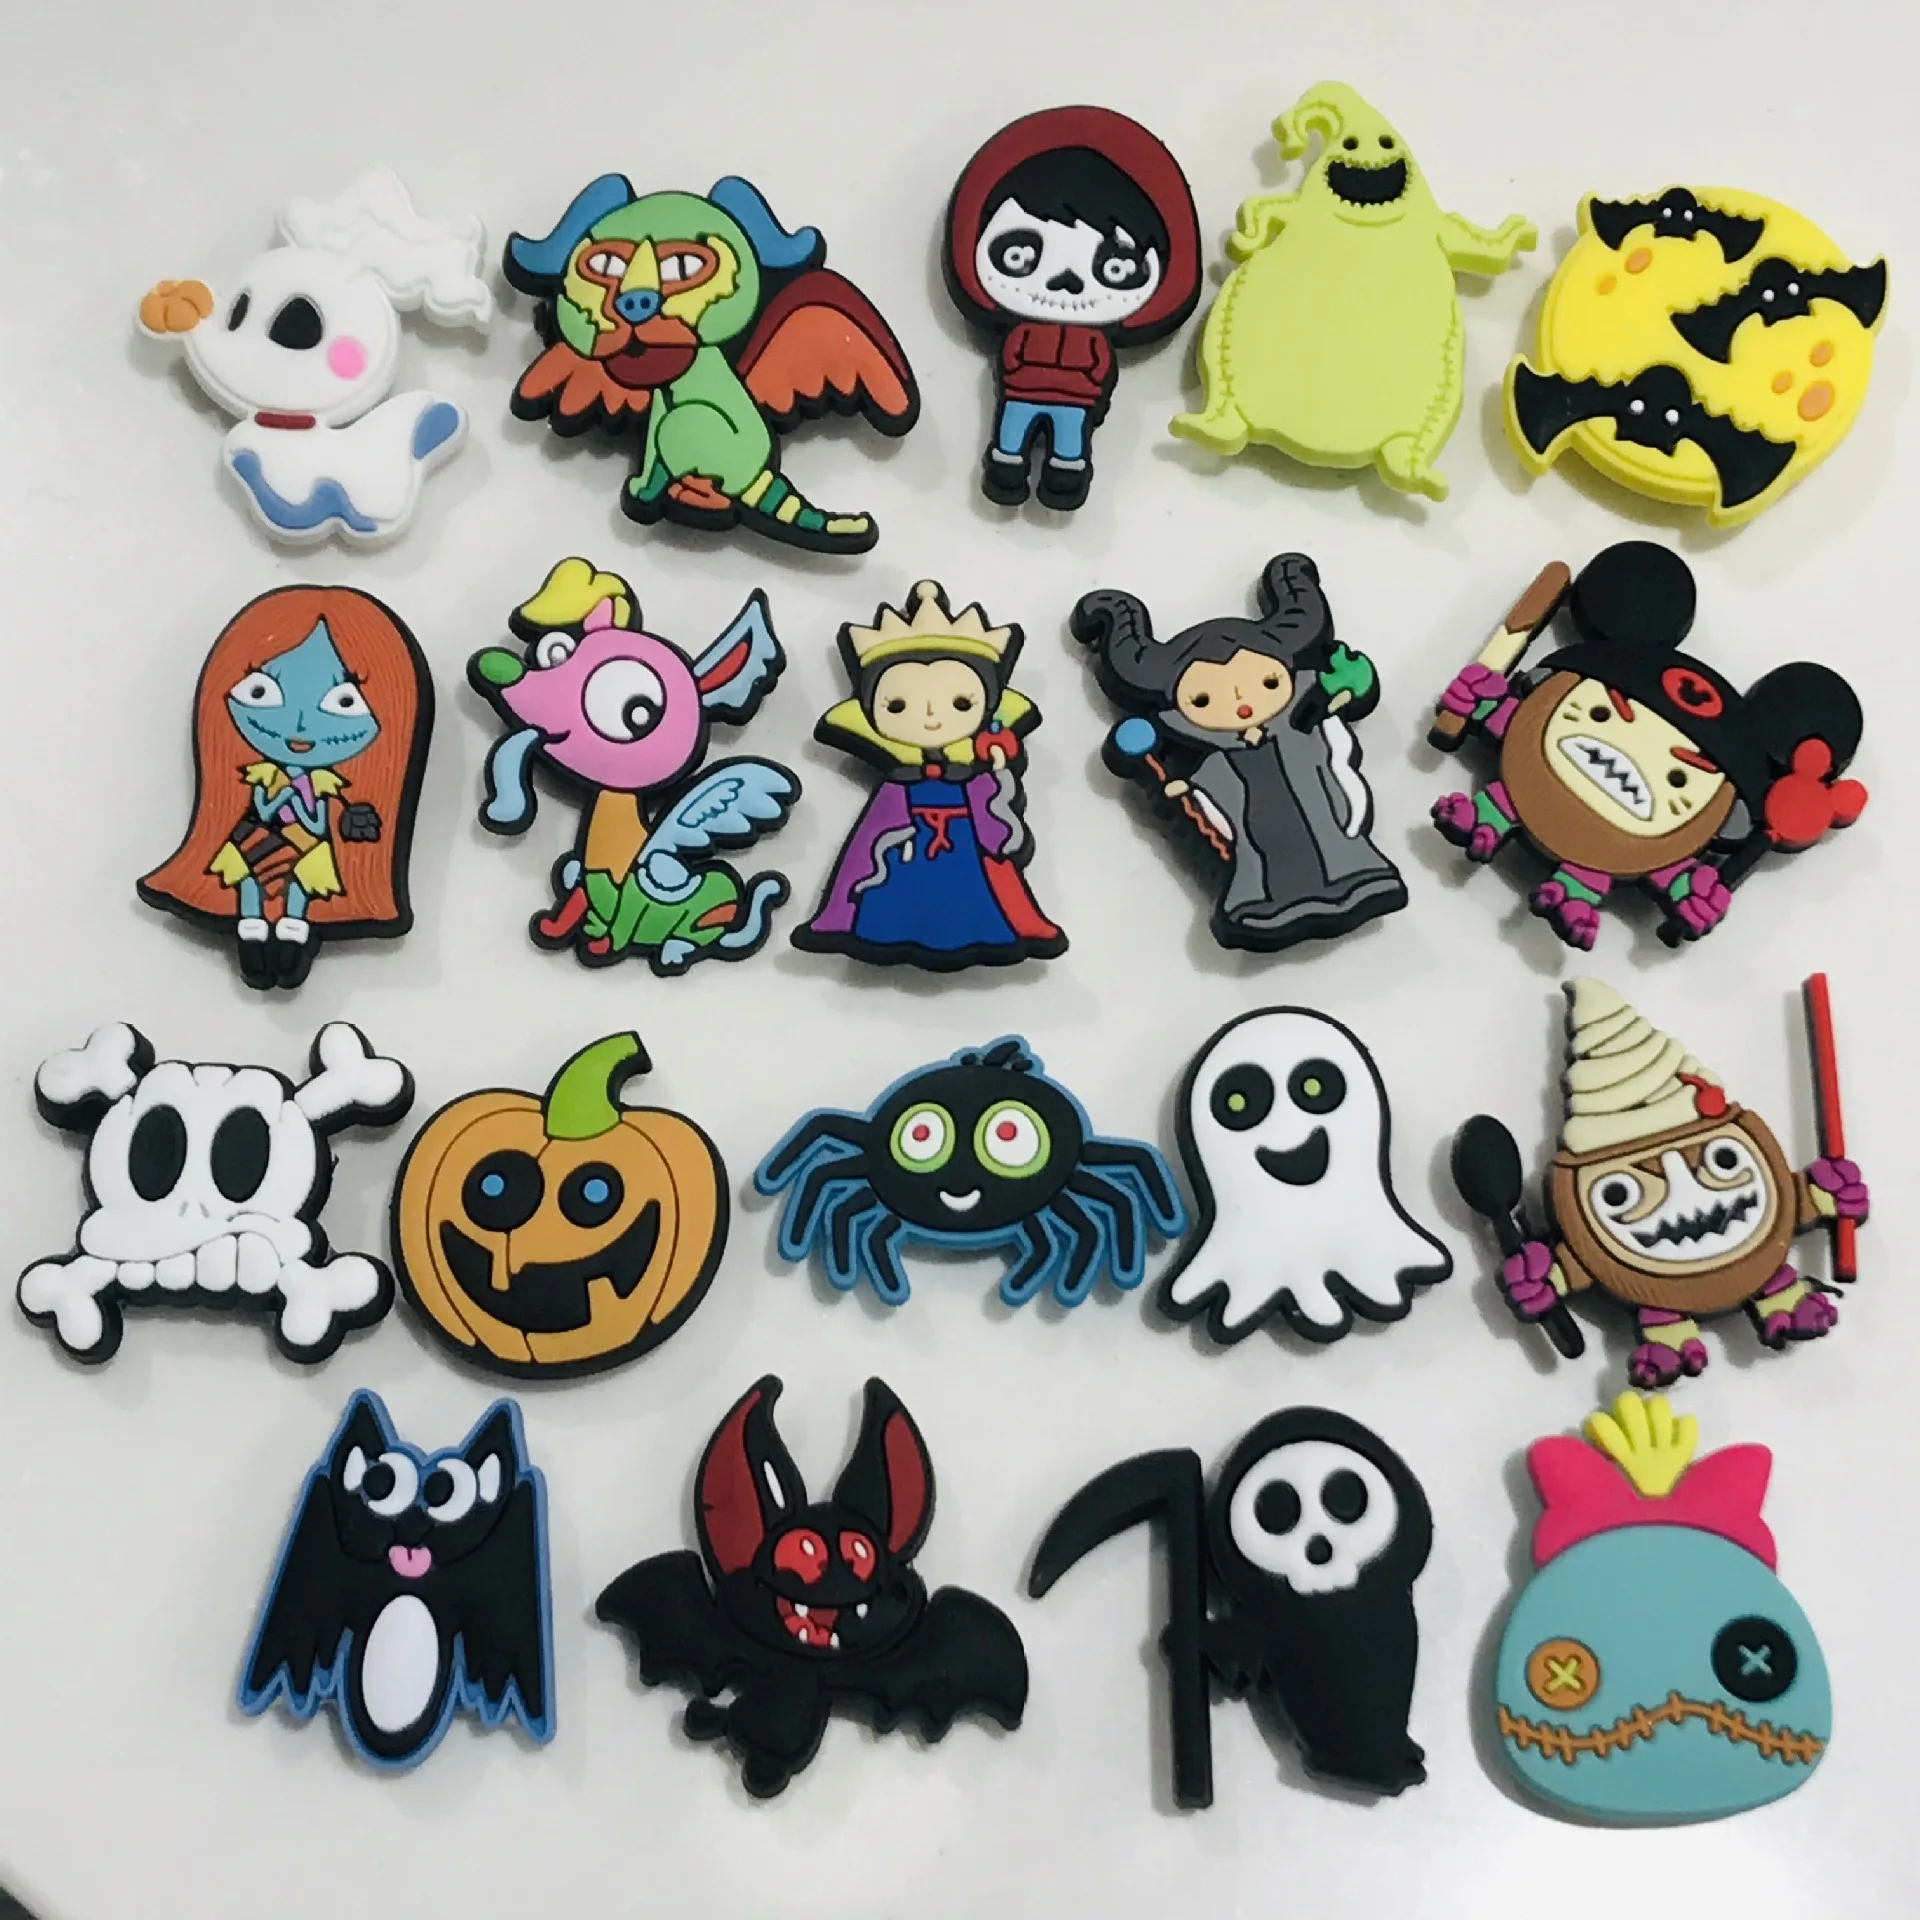 

Custom Soft Rubber Pvc Shoe Charms grupo firme halloween clog charm For Clogs Shoes Buckle Decorations, As picture shows